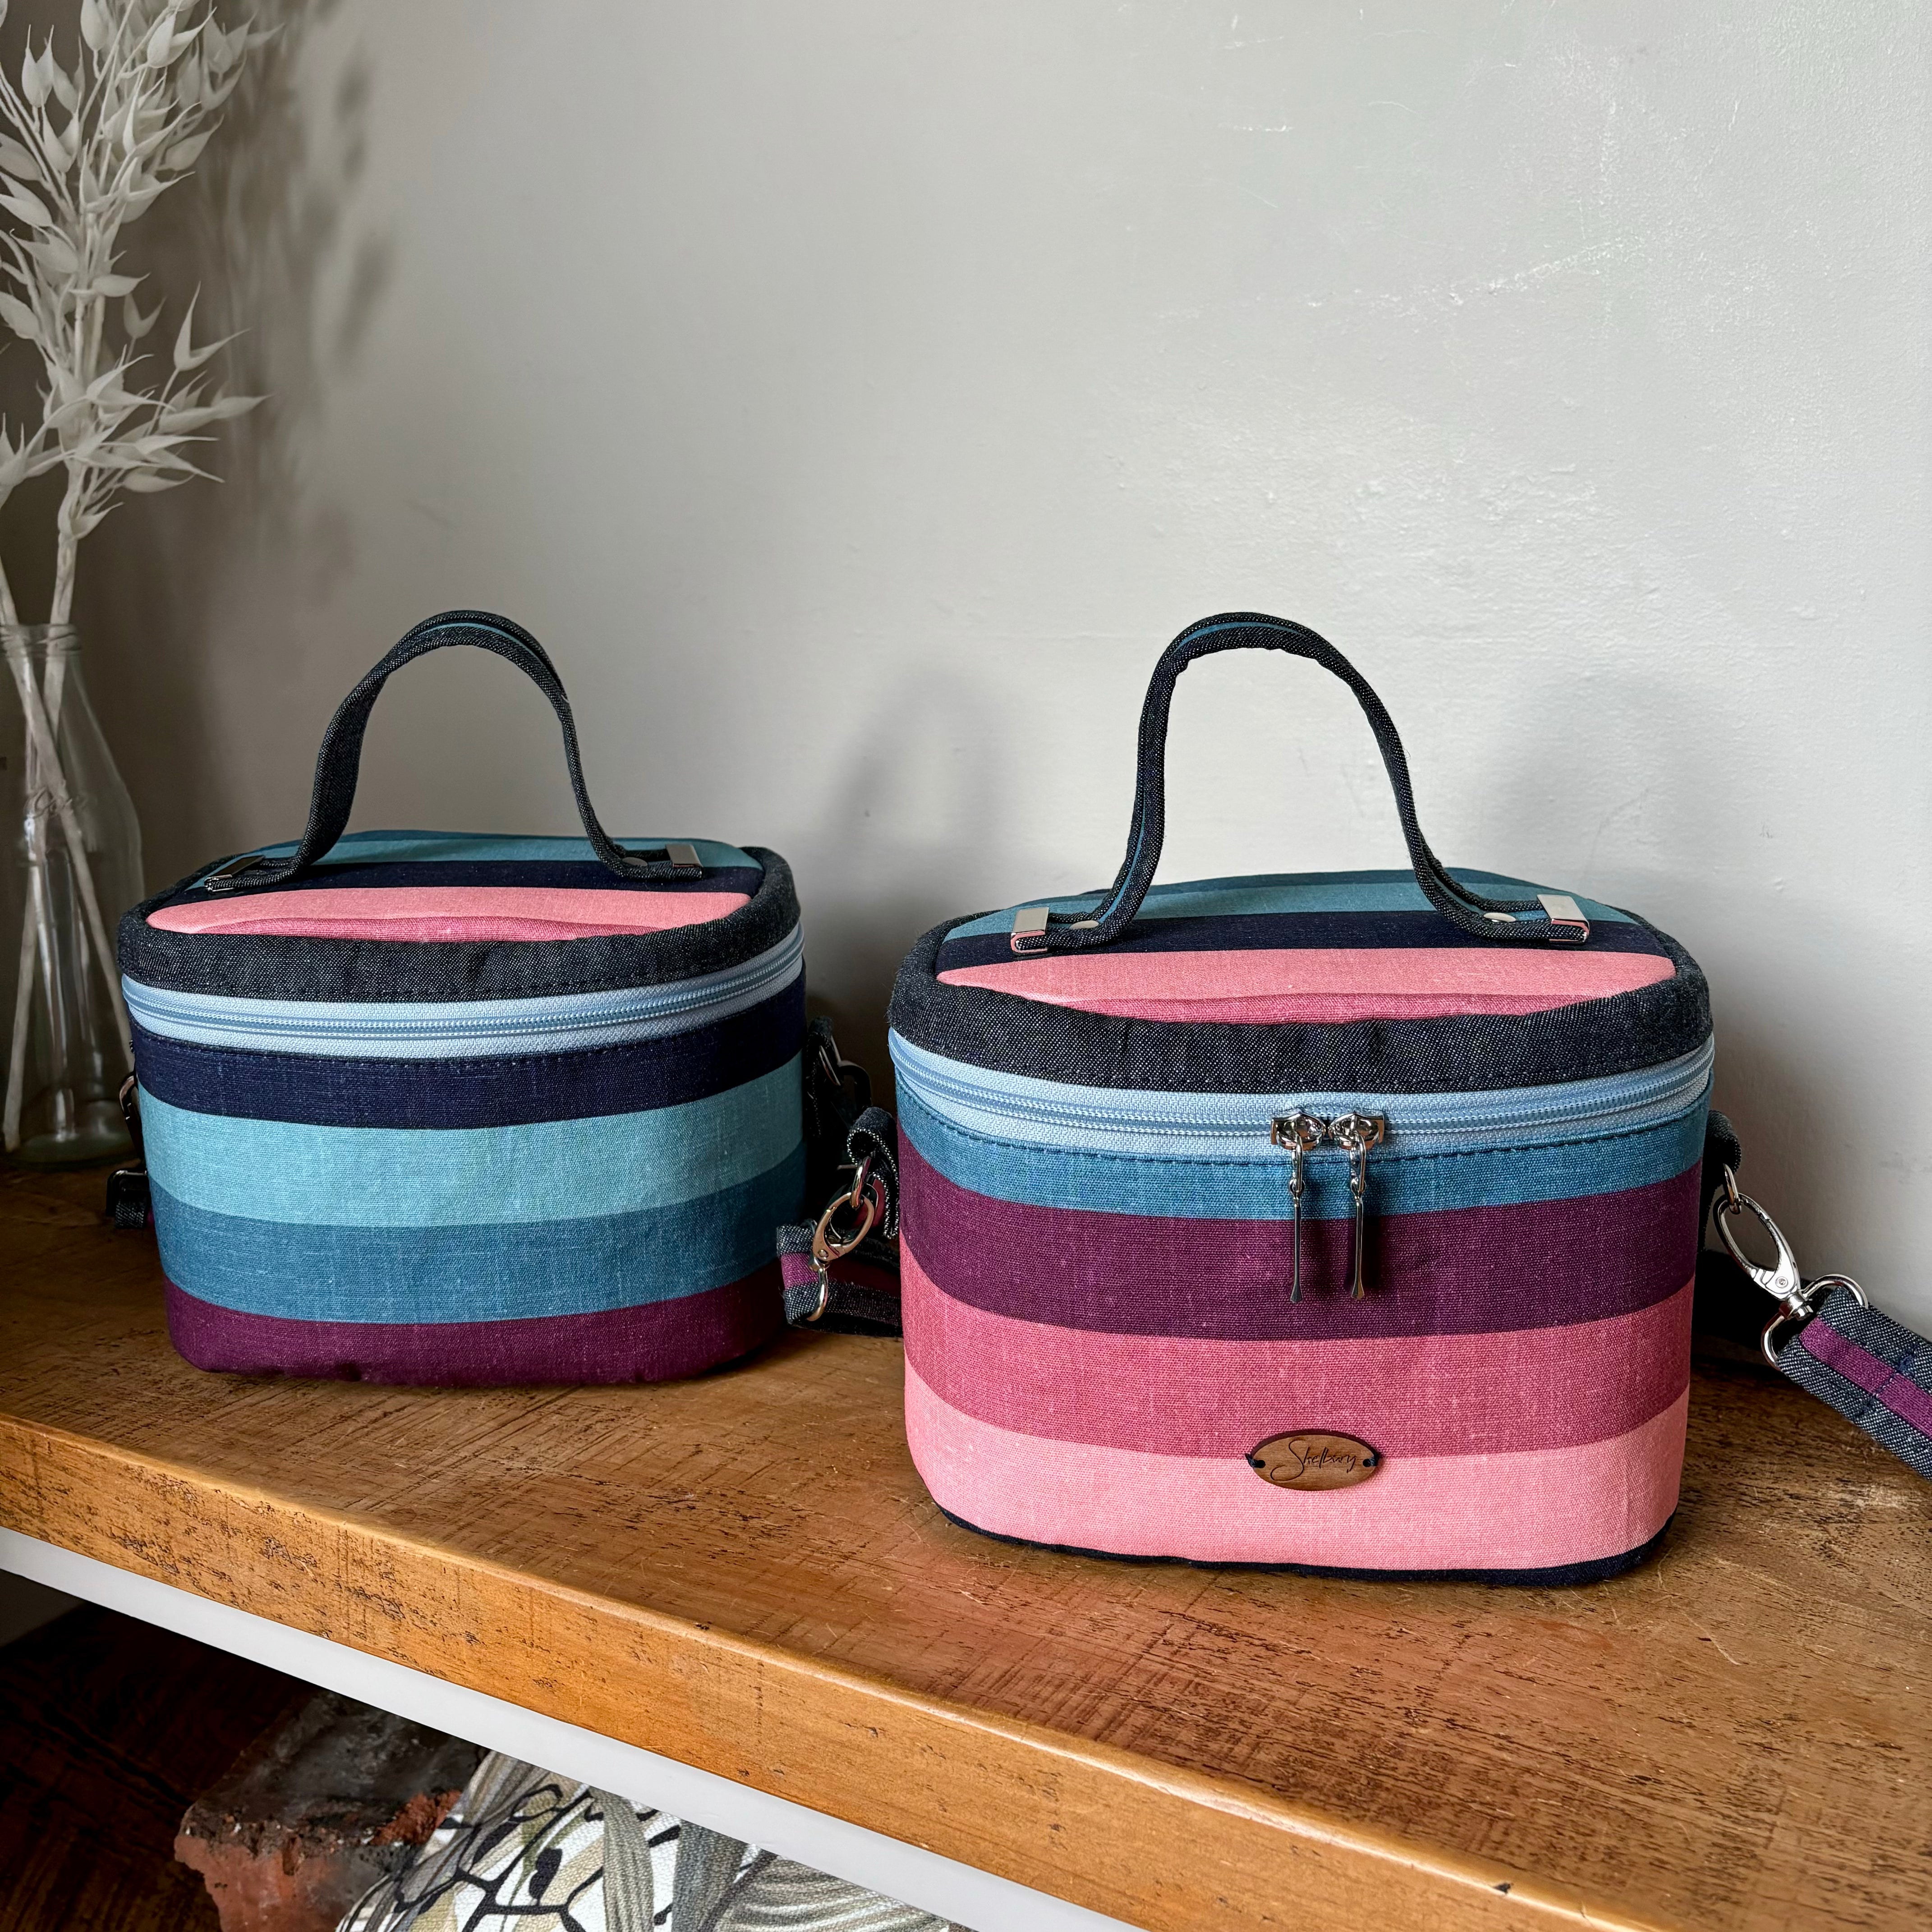 Limited Edition Jewelled Teresita Train Case in Sugar Plum Sparkle, handmade in a jewelled striped design with pink, burgundy and blue hues.